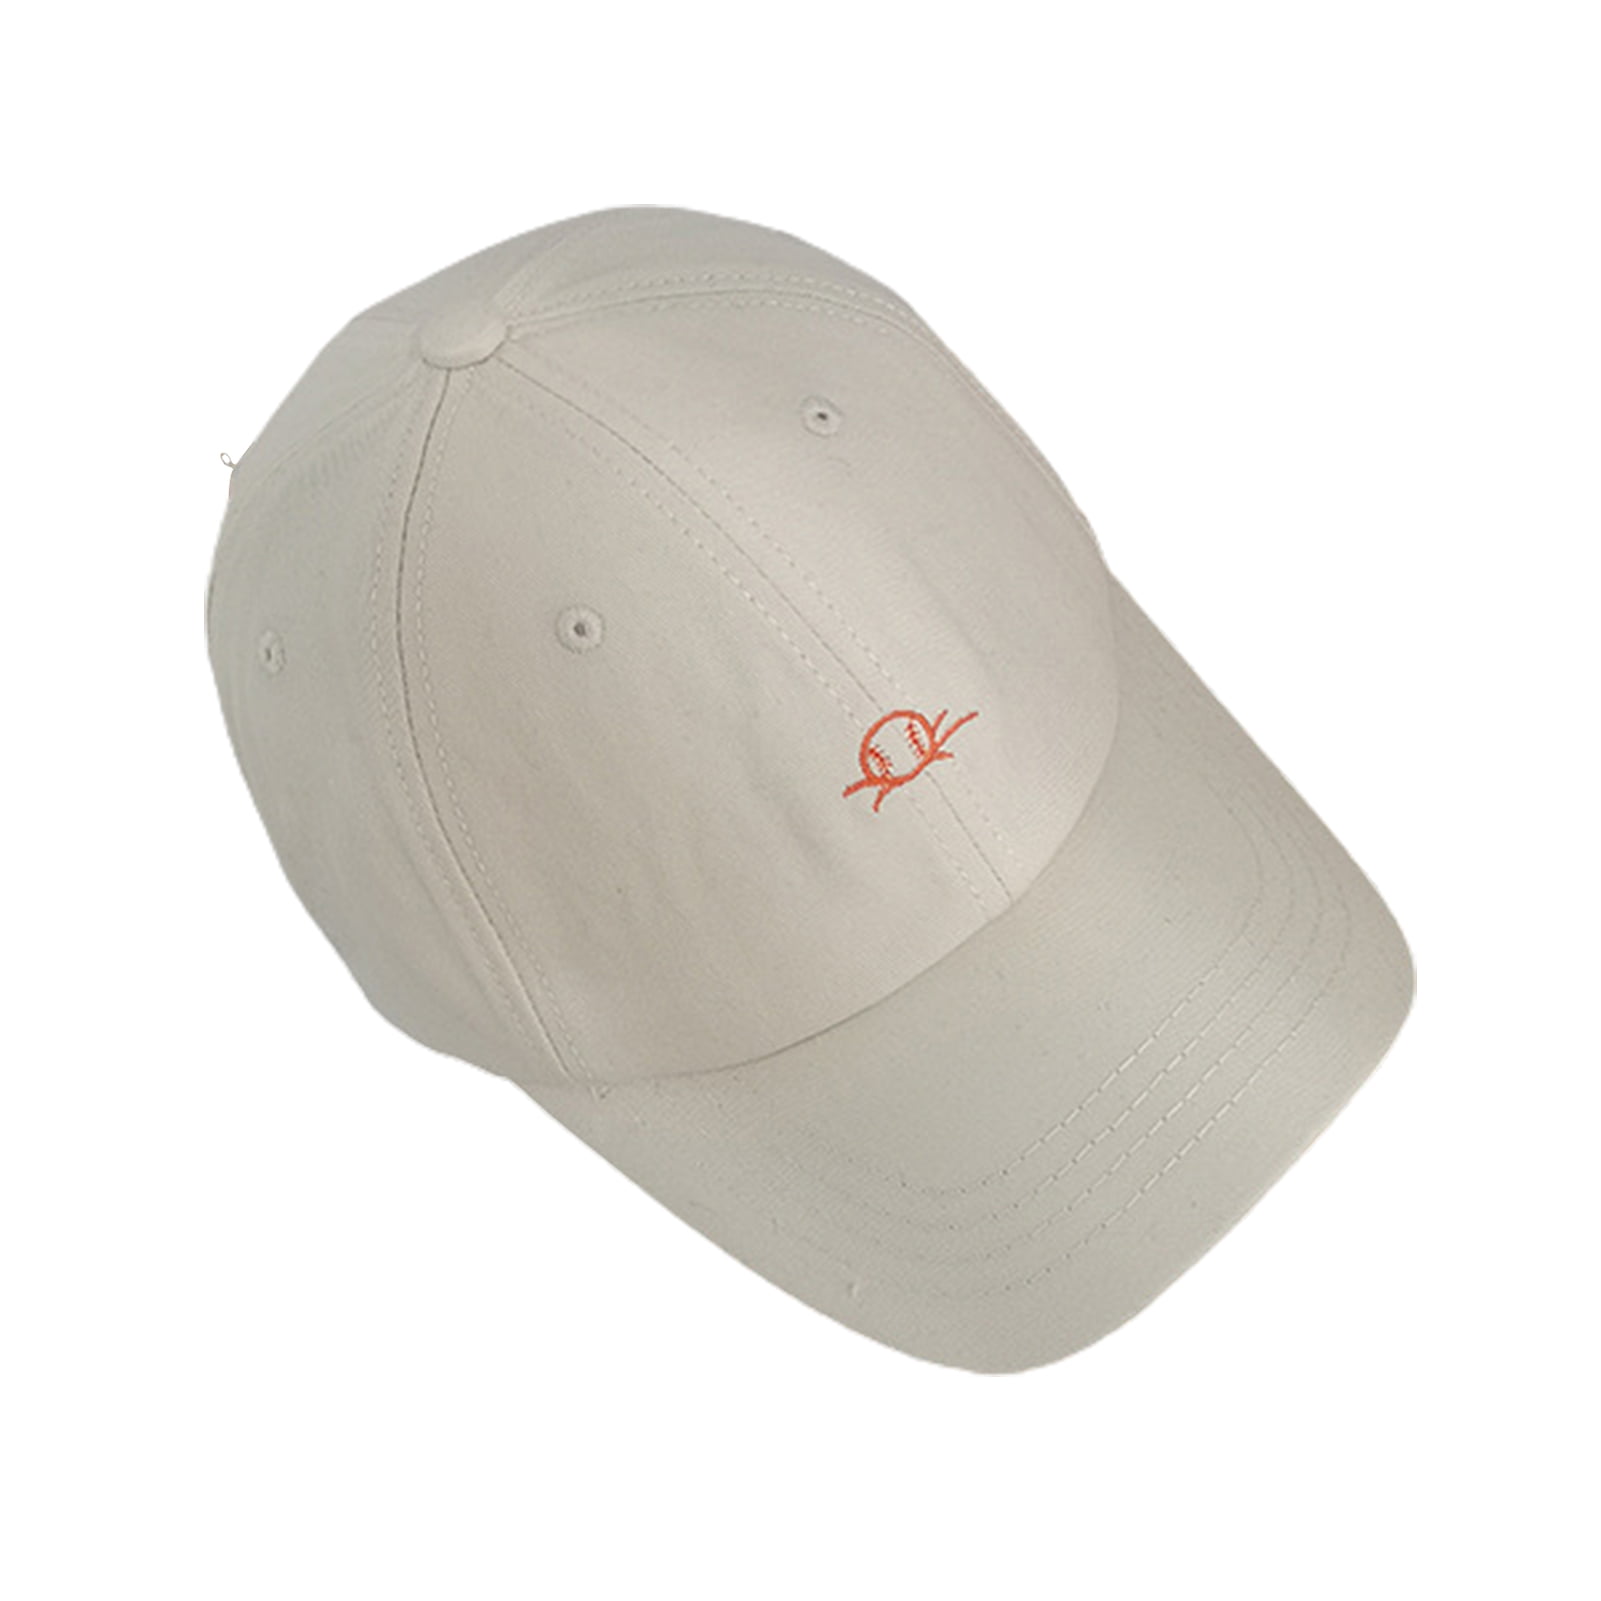 Mazda Logo Adjustable.Fitted Exquisite Pure Cotton Child Baseball Cap